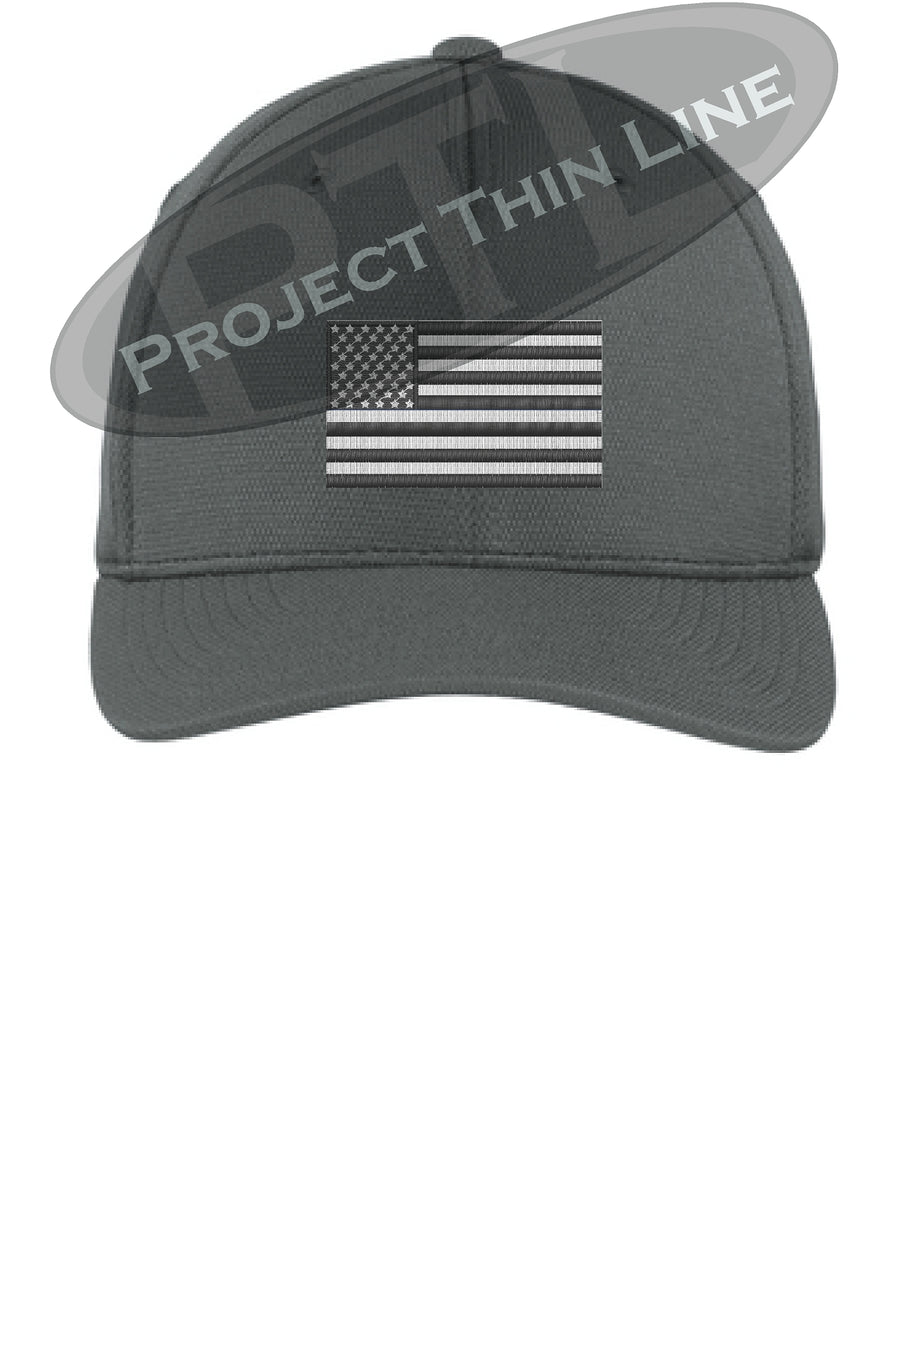 Embroidered Tactical / Subdued American Flag Flex Fit Fitted TRUCKER Hat